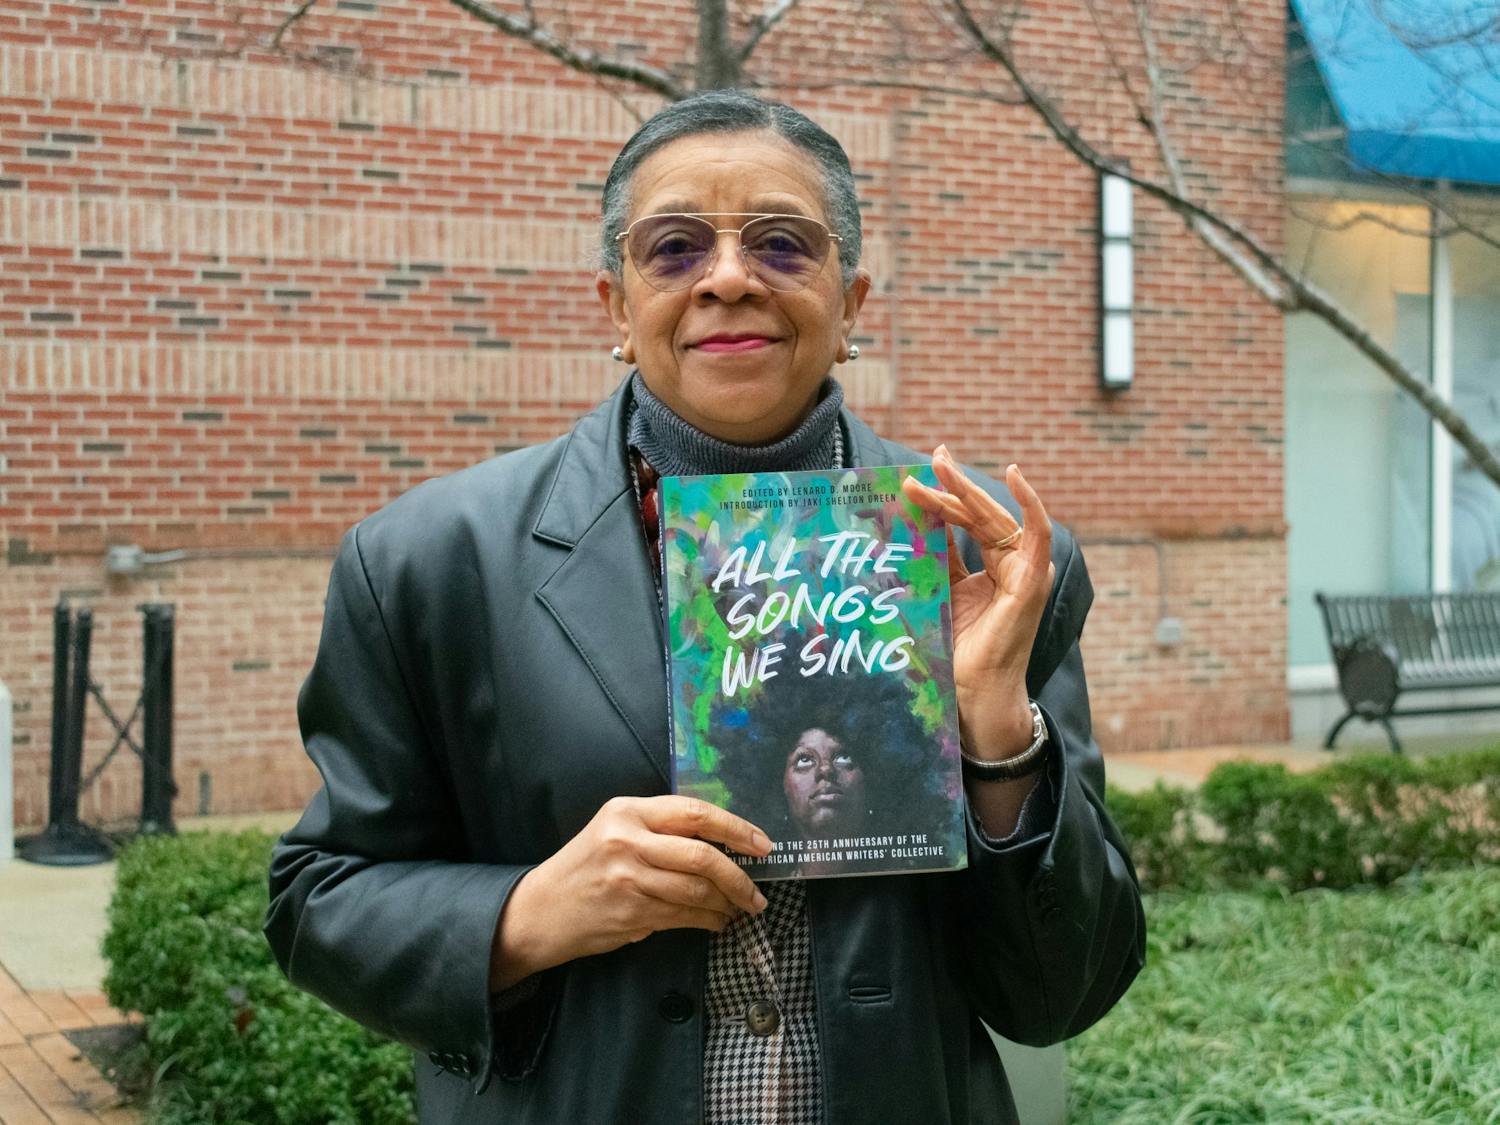 The Carolina African American Writers' Collective was founded in 1995; four members of the group read from the newly released anthology "All The Songs We Sing" on Tuesday, February 9th, 2021. Here, L. Teresa Church stands with a copy of the anthology.